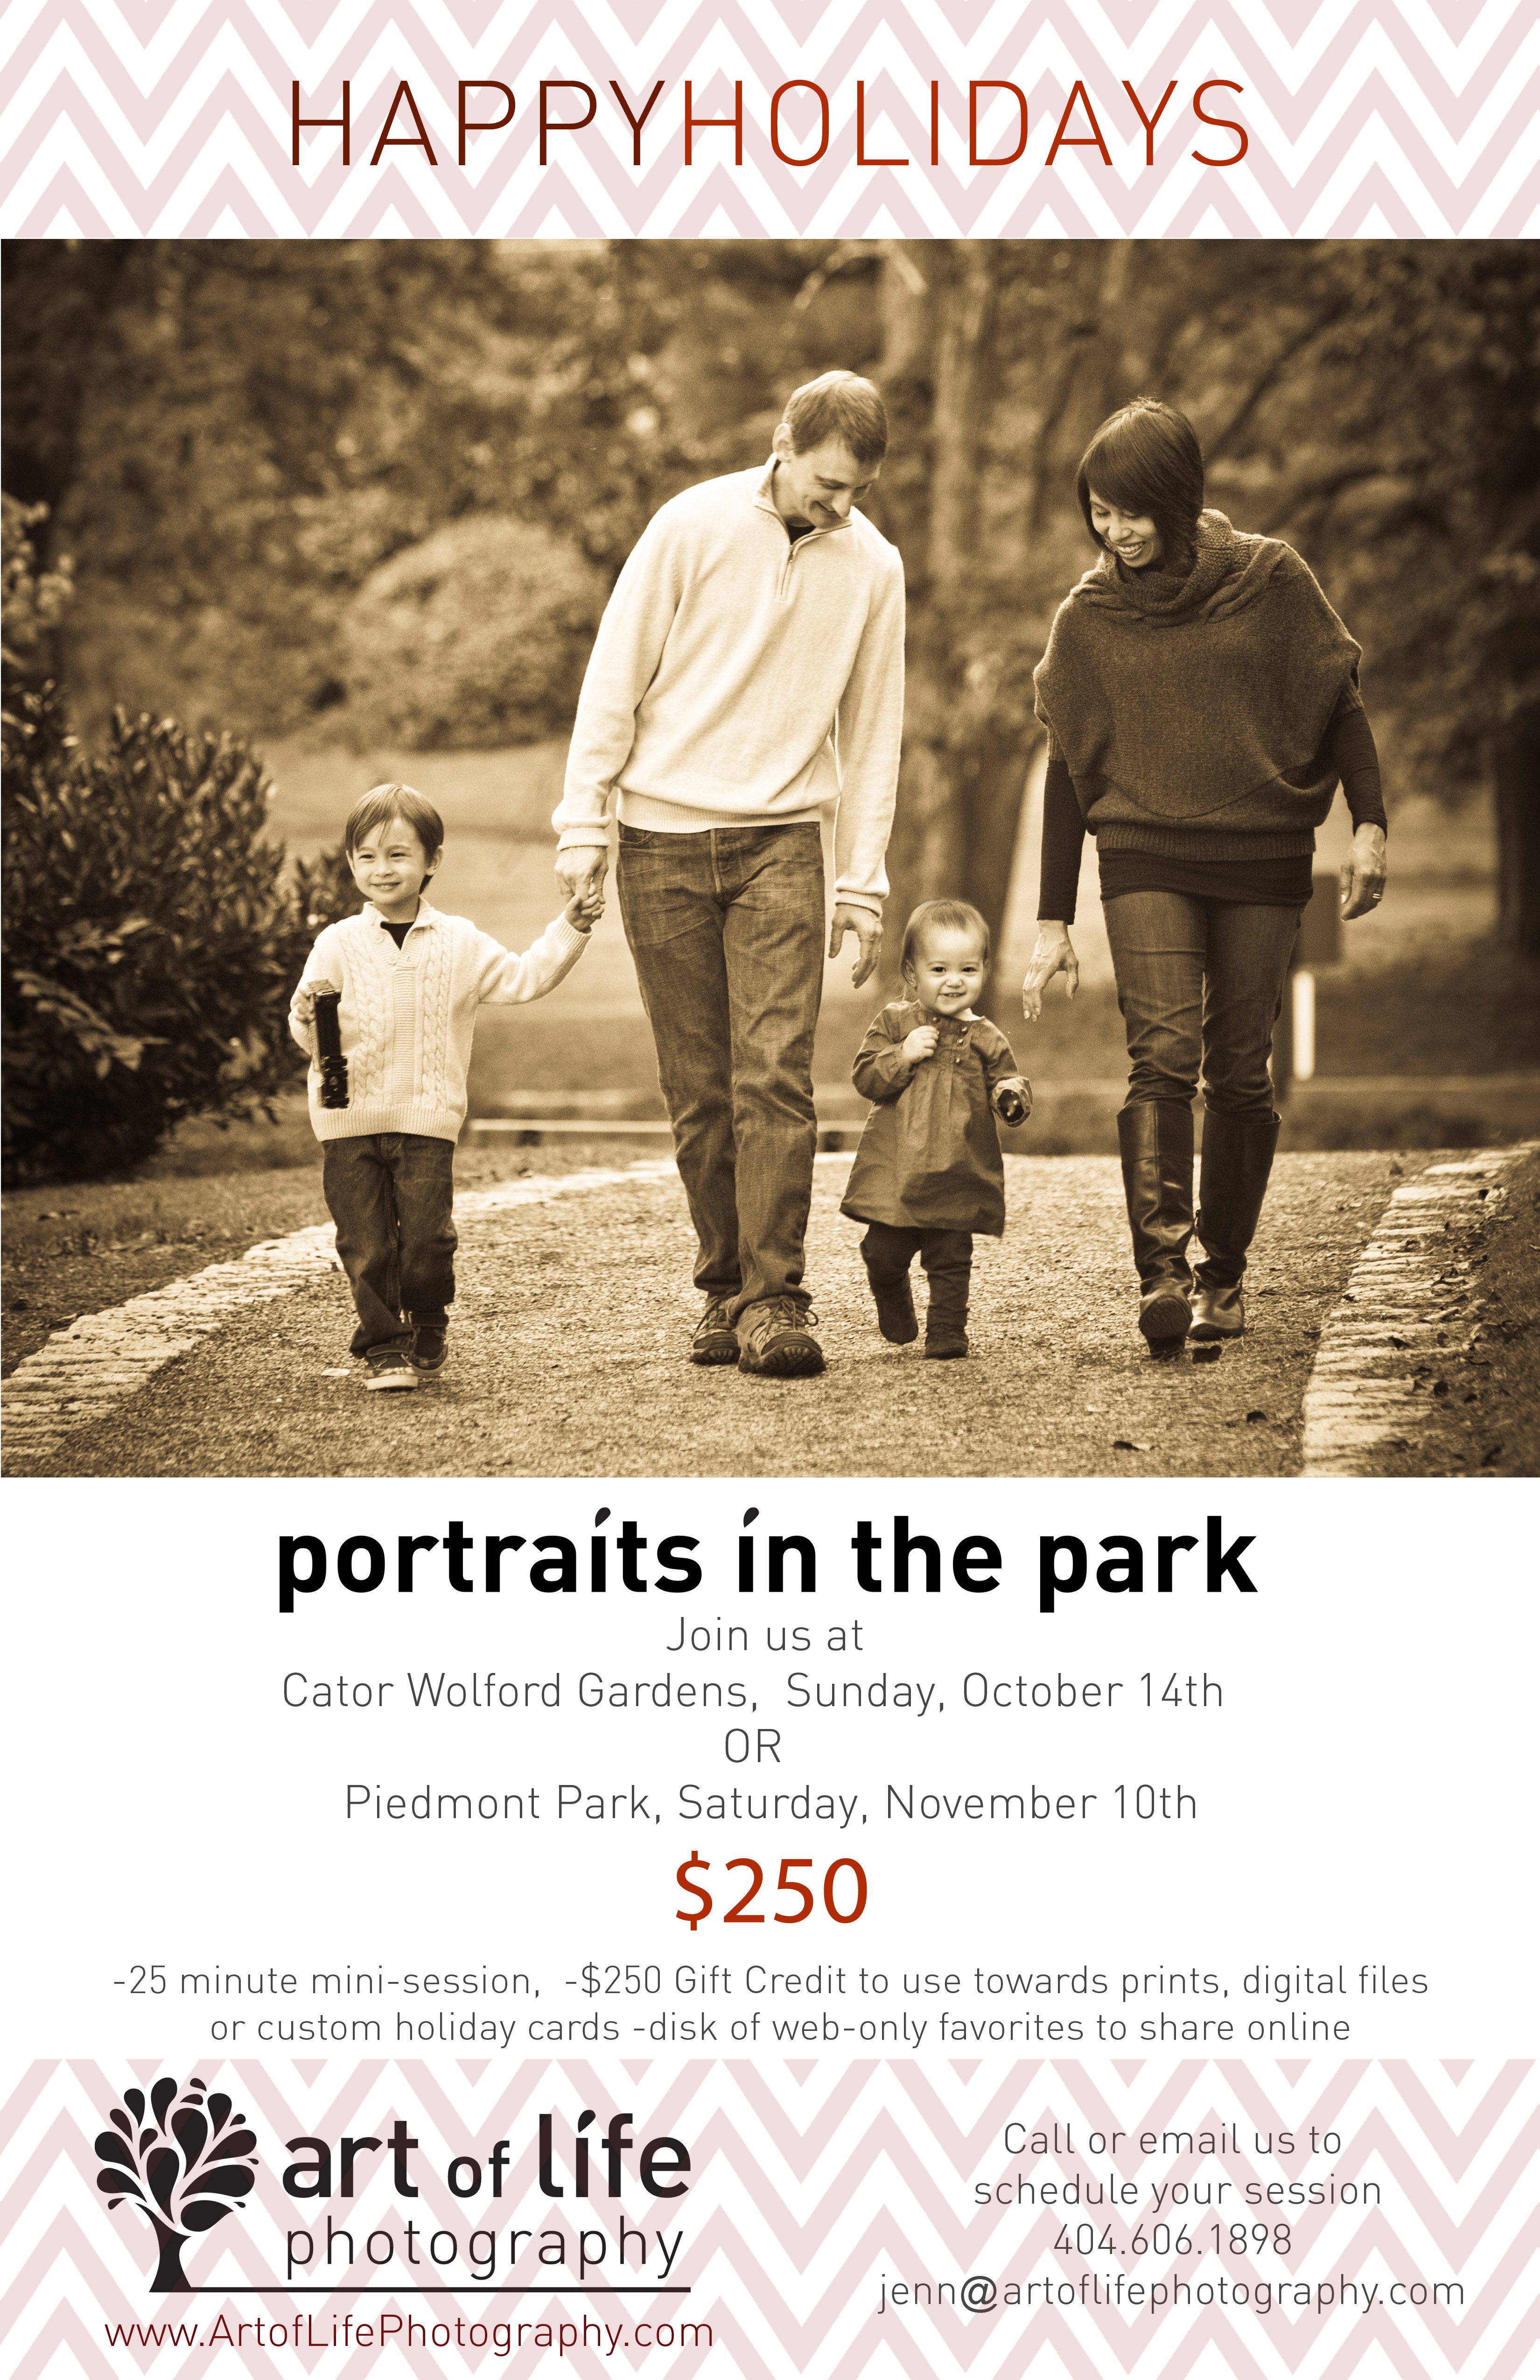 Portraits In The Park - for the Holidays